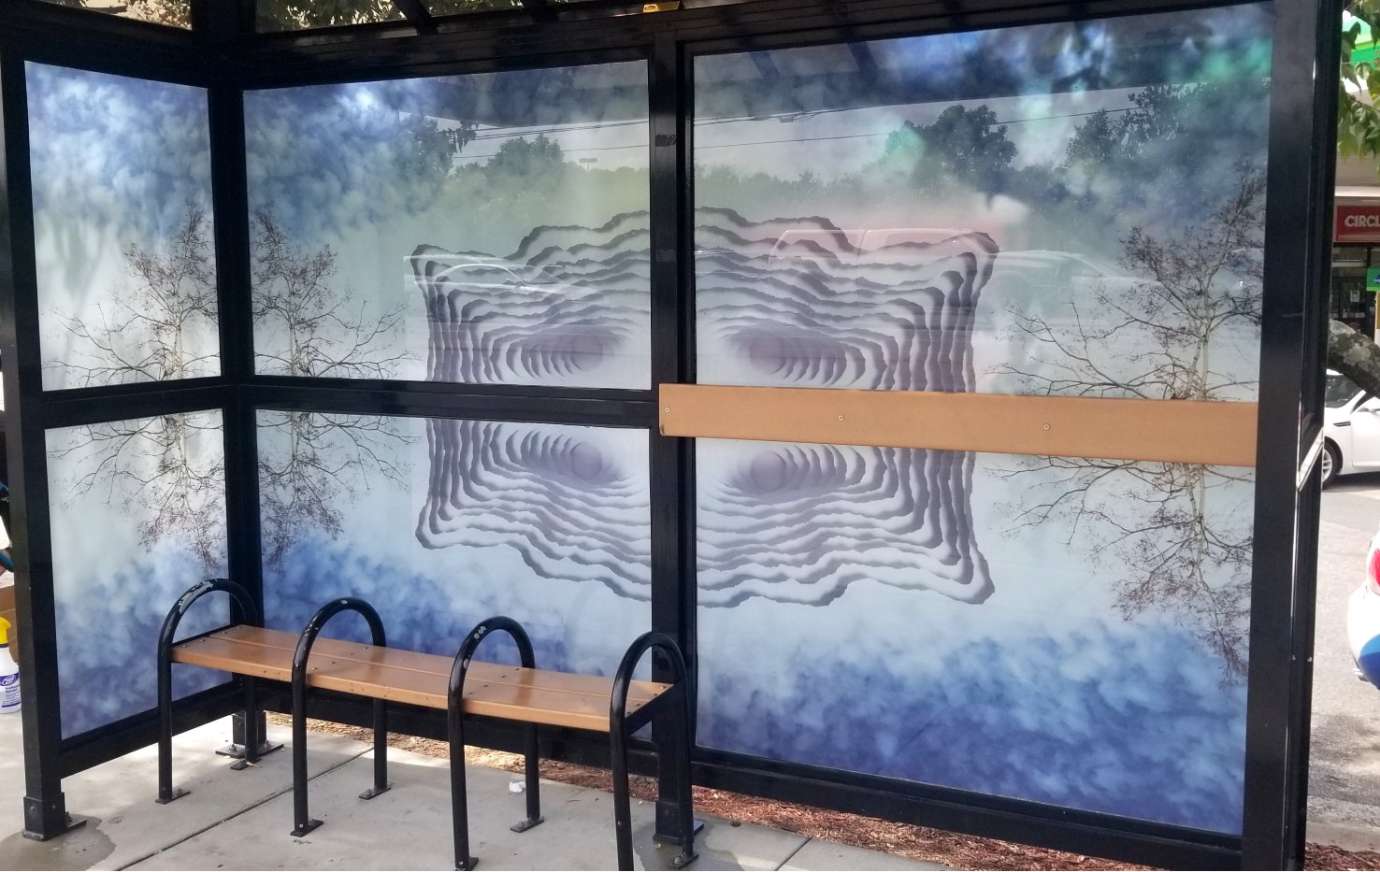 artwork by Scott Hazard covering the windows of a bus shelter